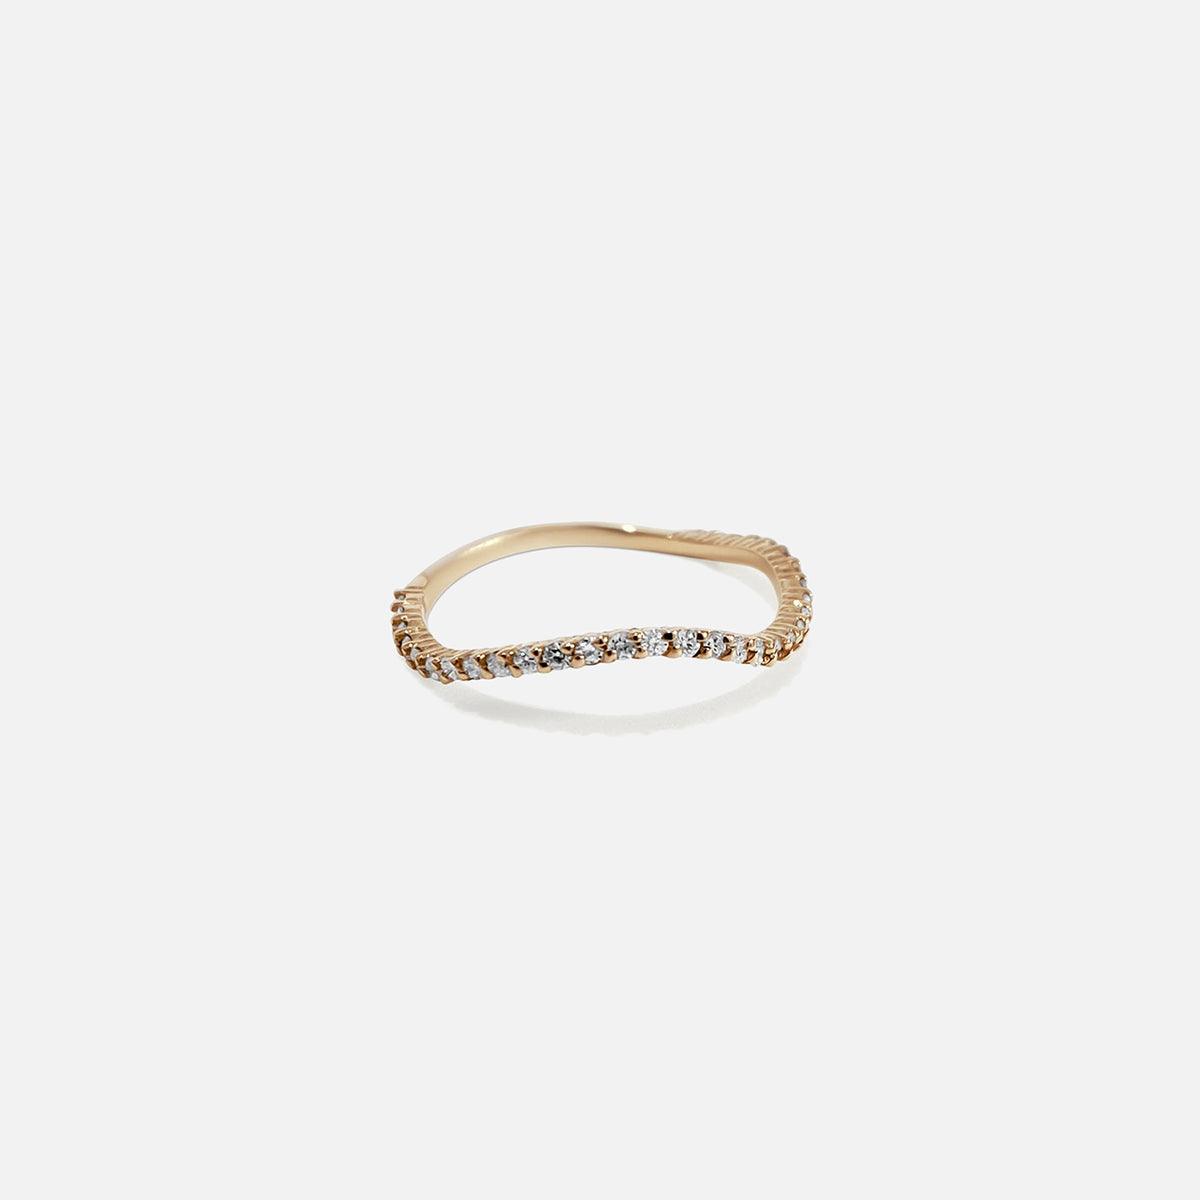 Pave Ocean Wave Diamond Band Ring - At Present